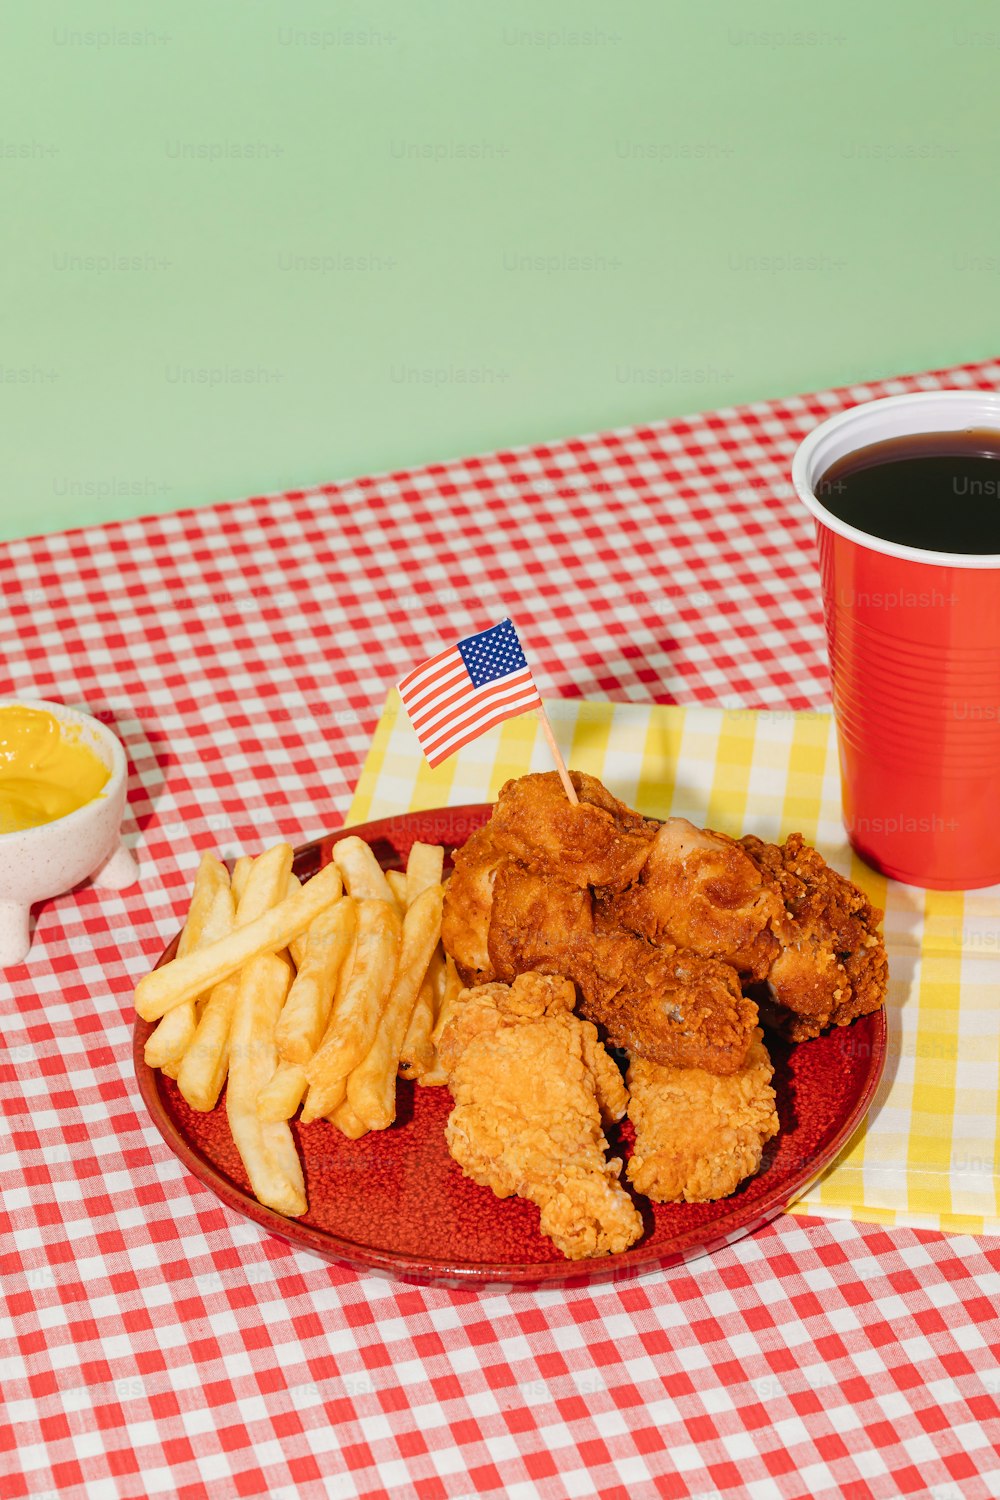 a plate of fried chicken, french fries and a bowl of mustard